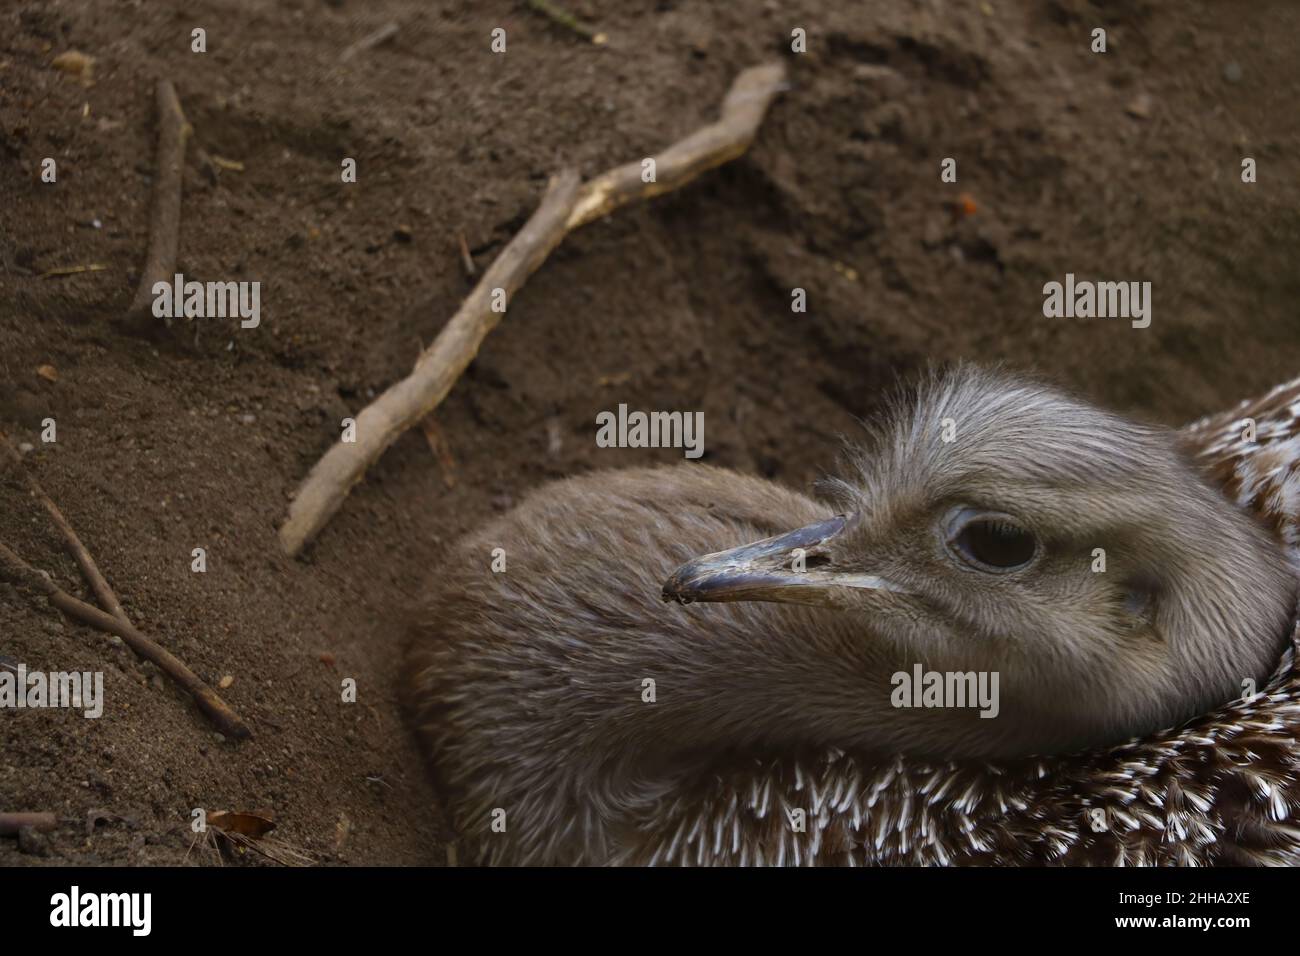 Out of focus. The ostrich sits in the sand on eggs. Stock Photo